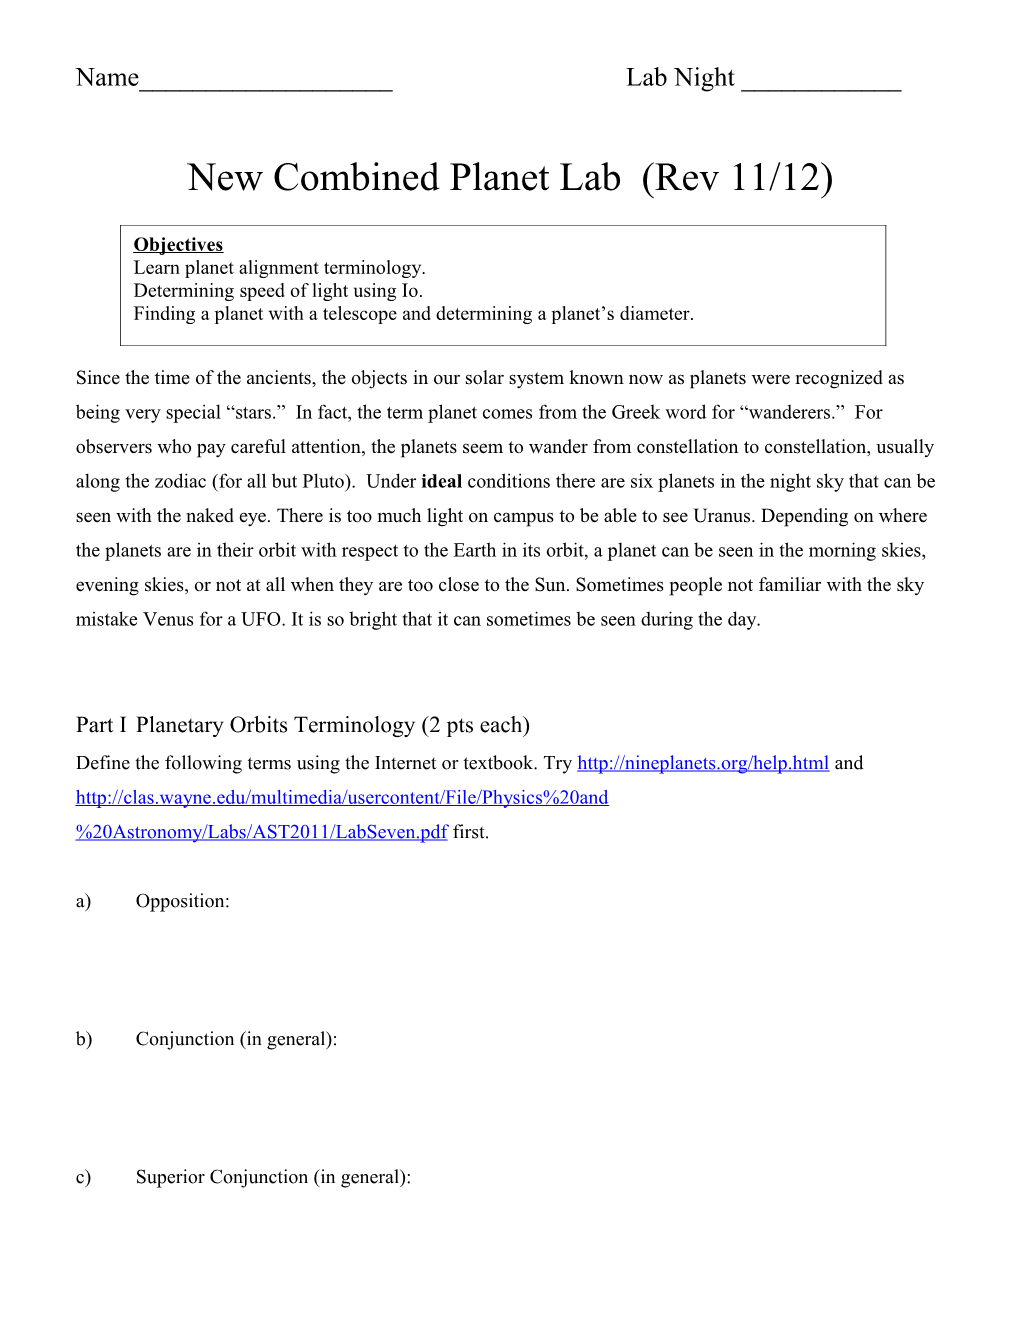 New Combined Planet Lab (Rev 11/12)